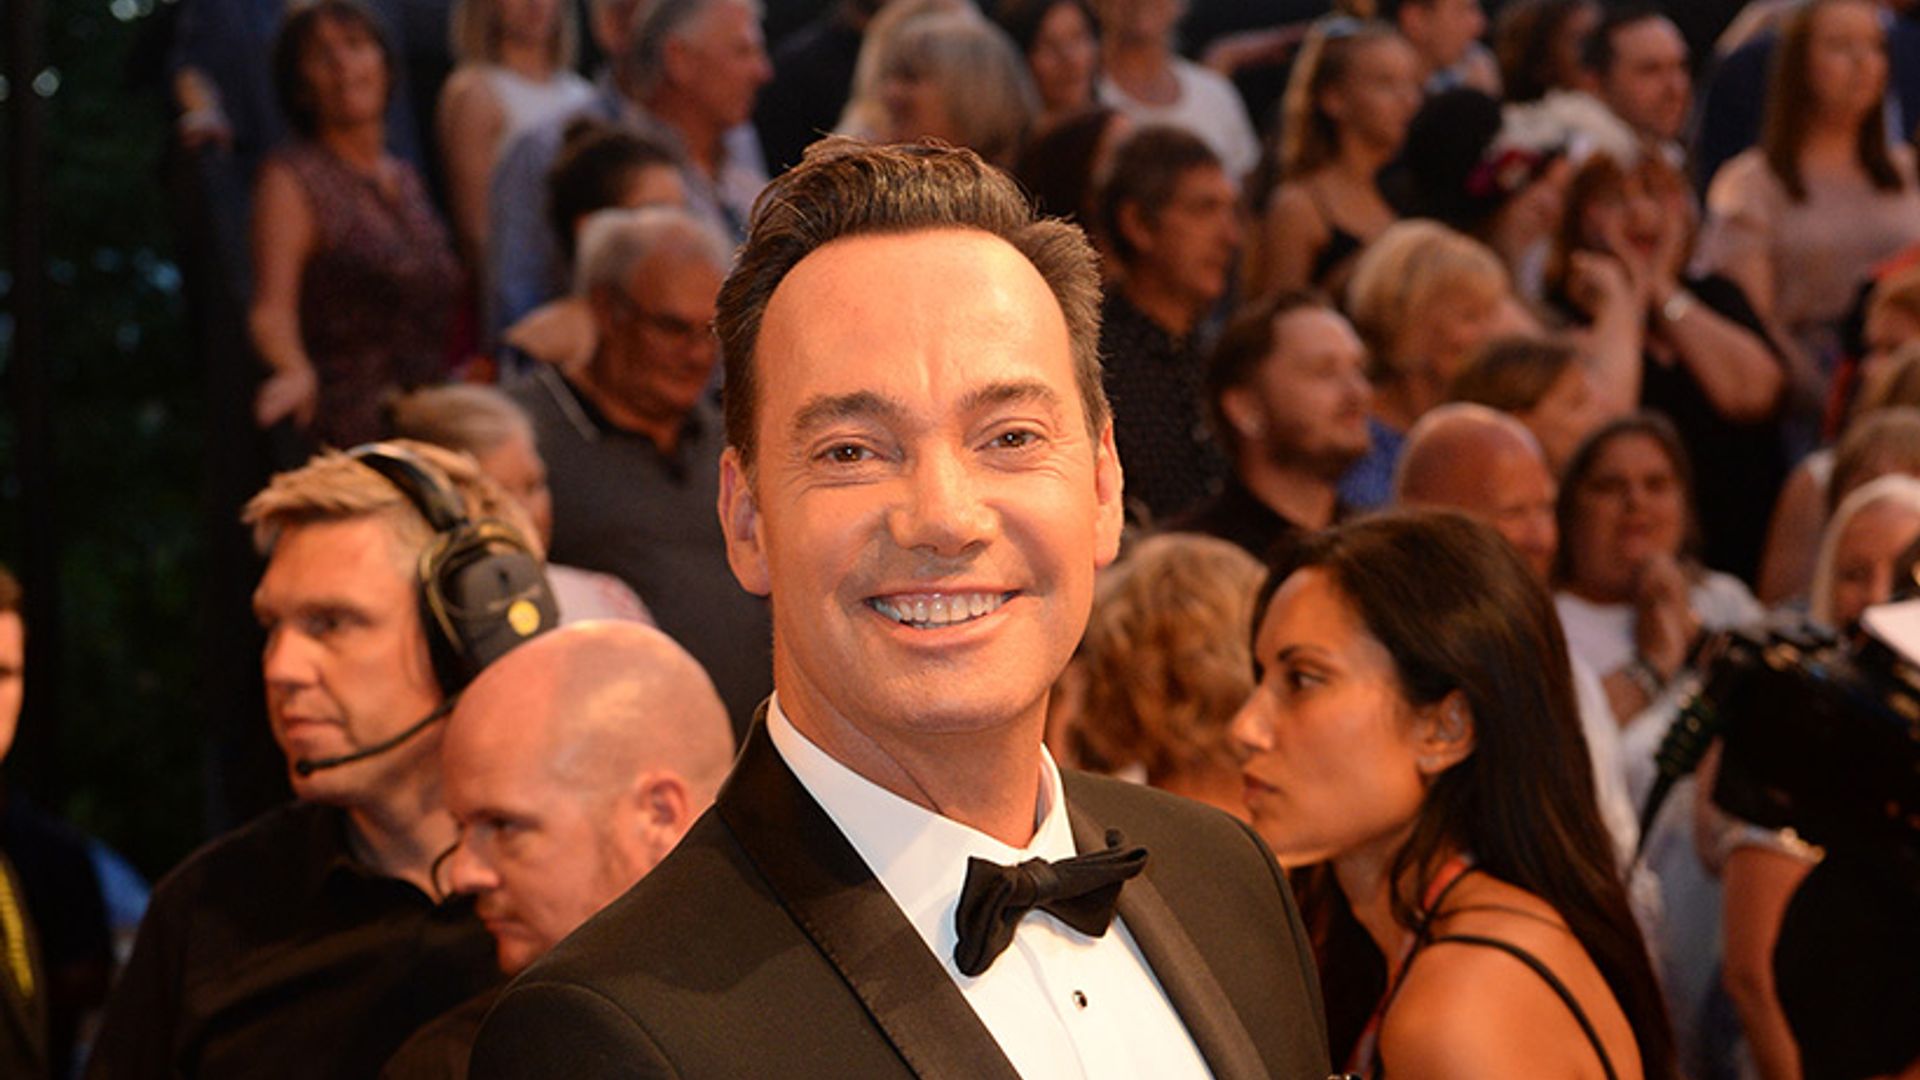 Craig Revel Horwood is looking for love - and is interested in men and women